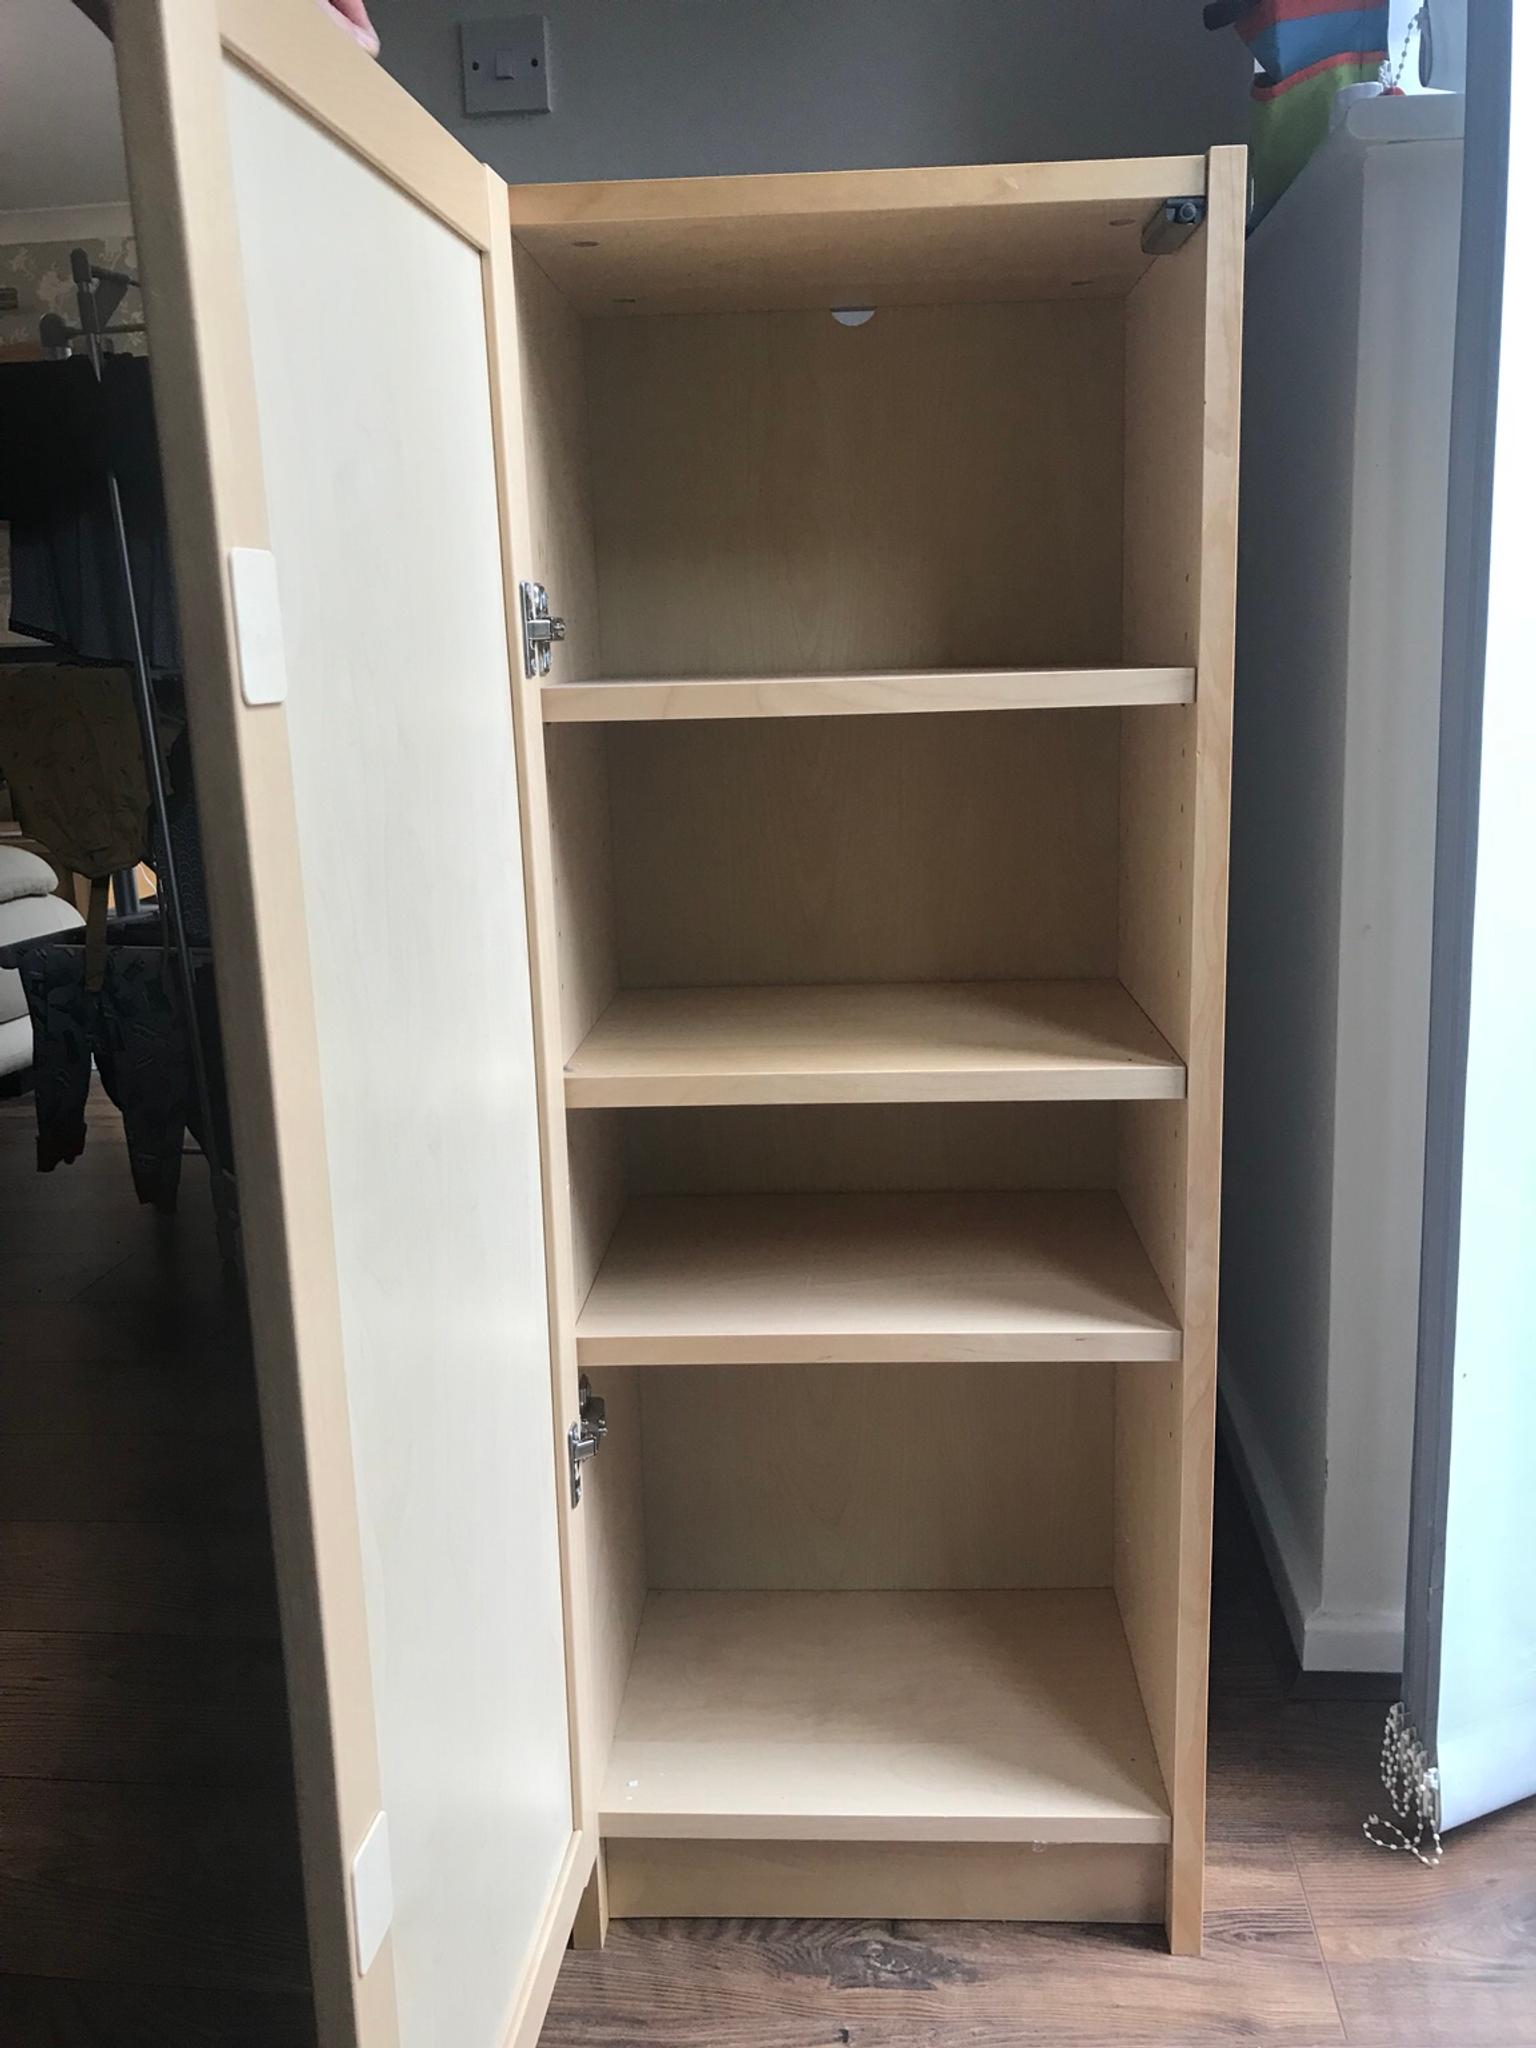 Small Ikea Billy Bookcase With Door In Ng6 Nottingham For 5 00